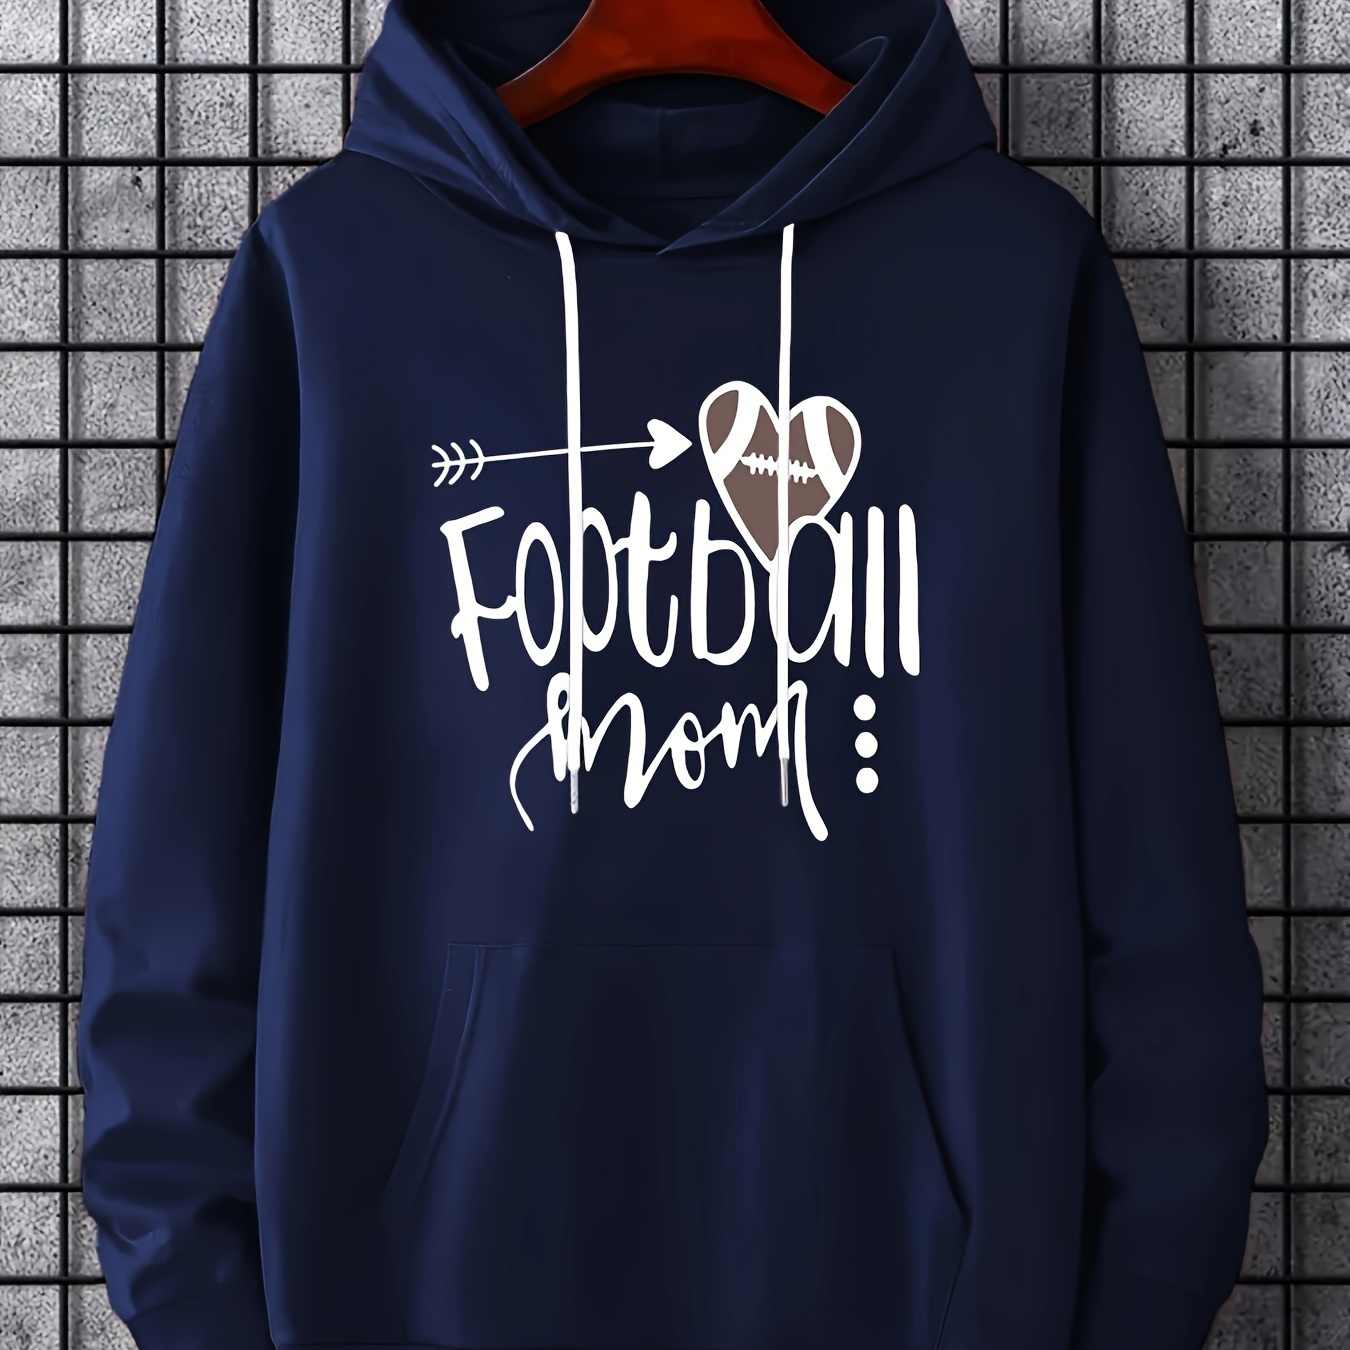 

''football Mom'' Print Hoodies For Men, Graphic Hoodie With Kangaroo Pocket, Comfy Loose Trendy Hooded Pullover, Mens Clothing For Autumn Winter